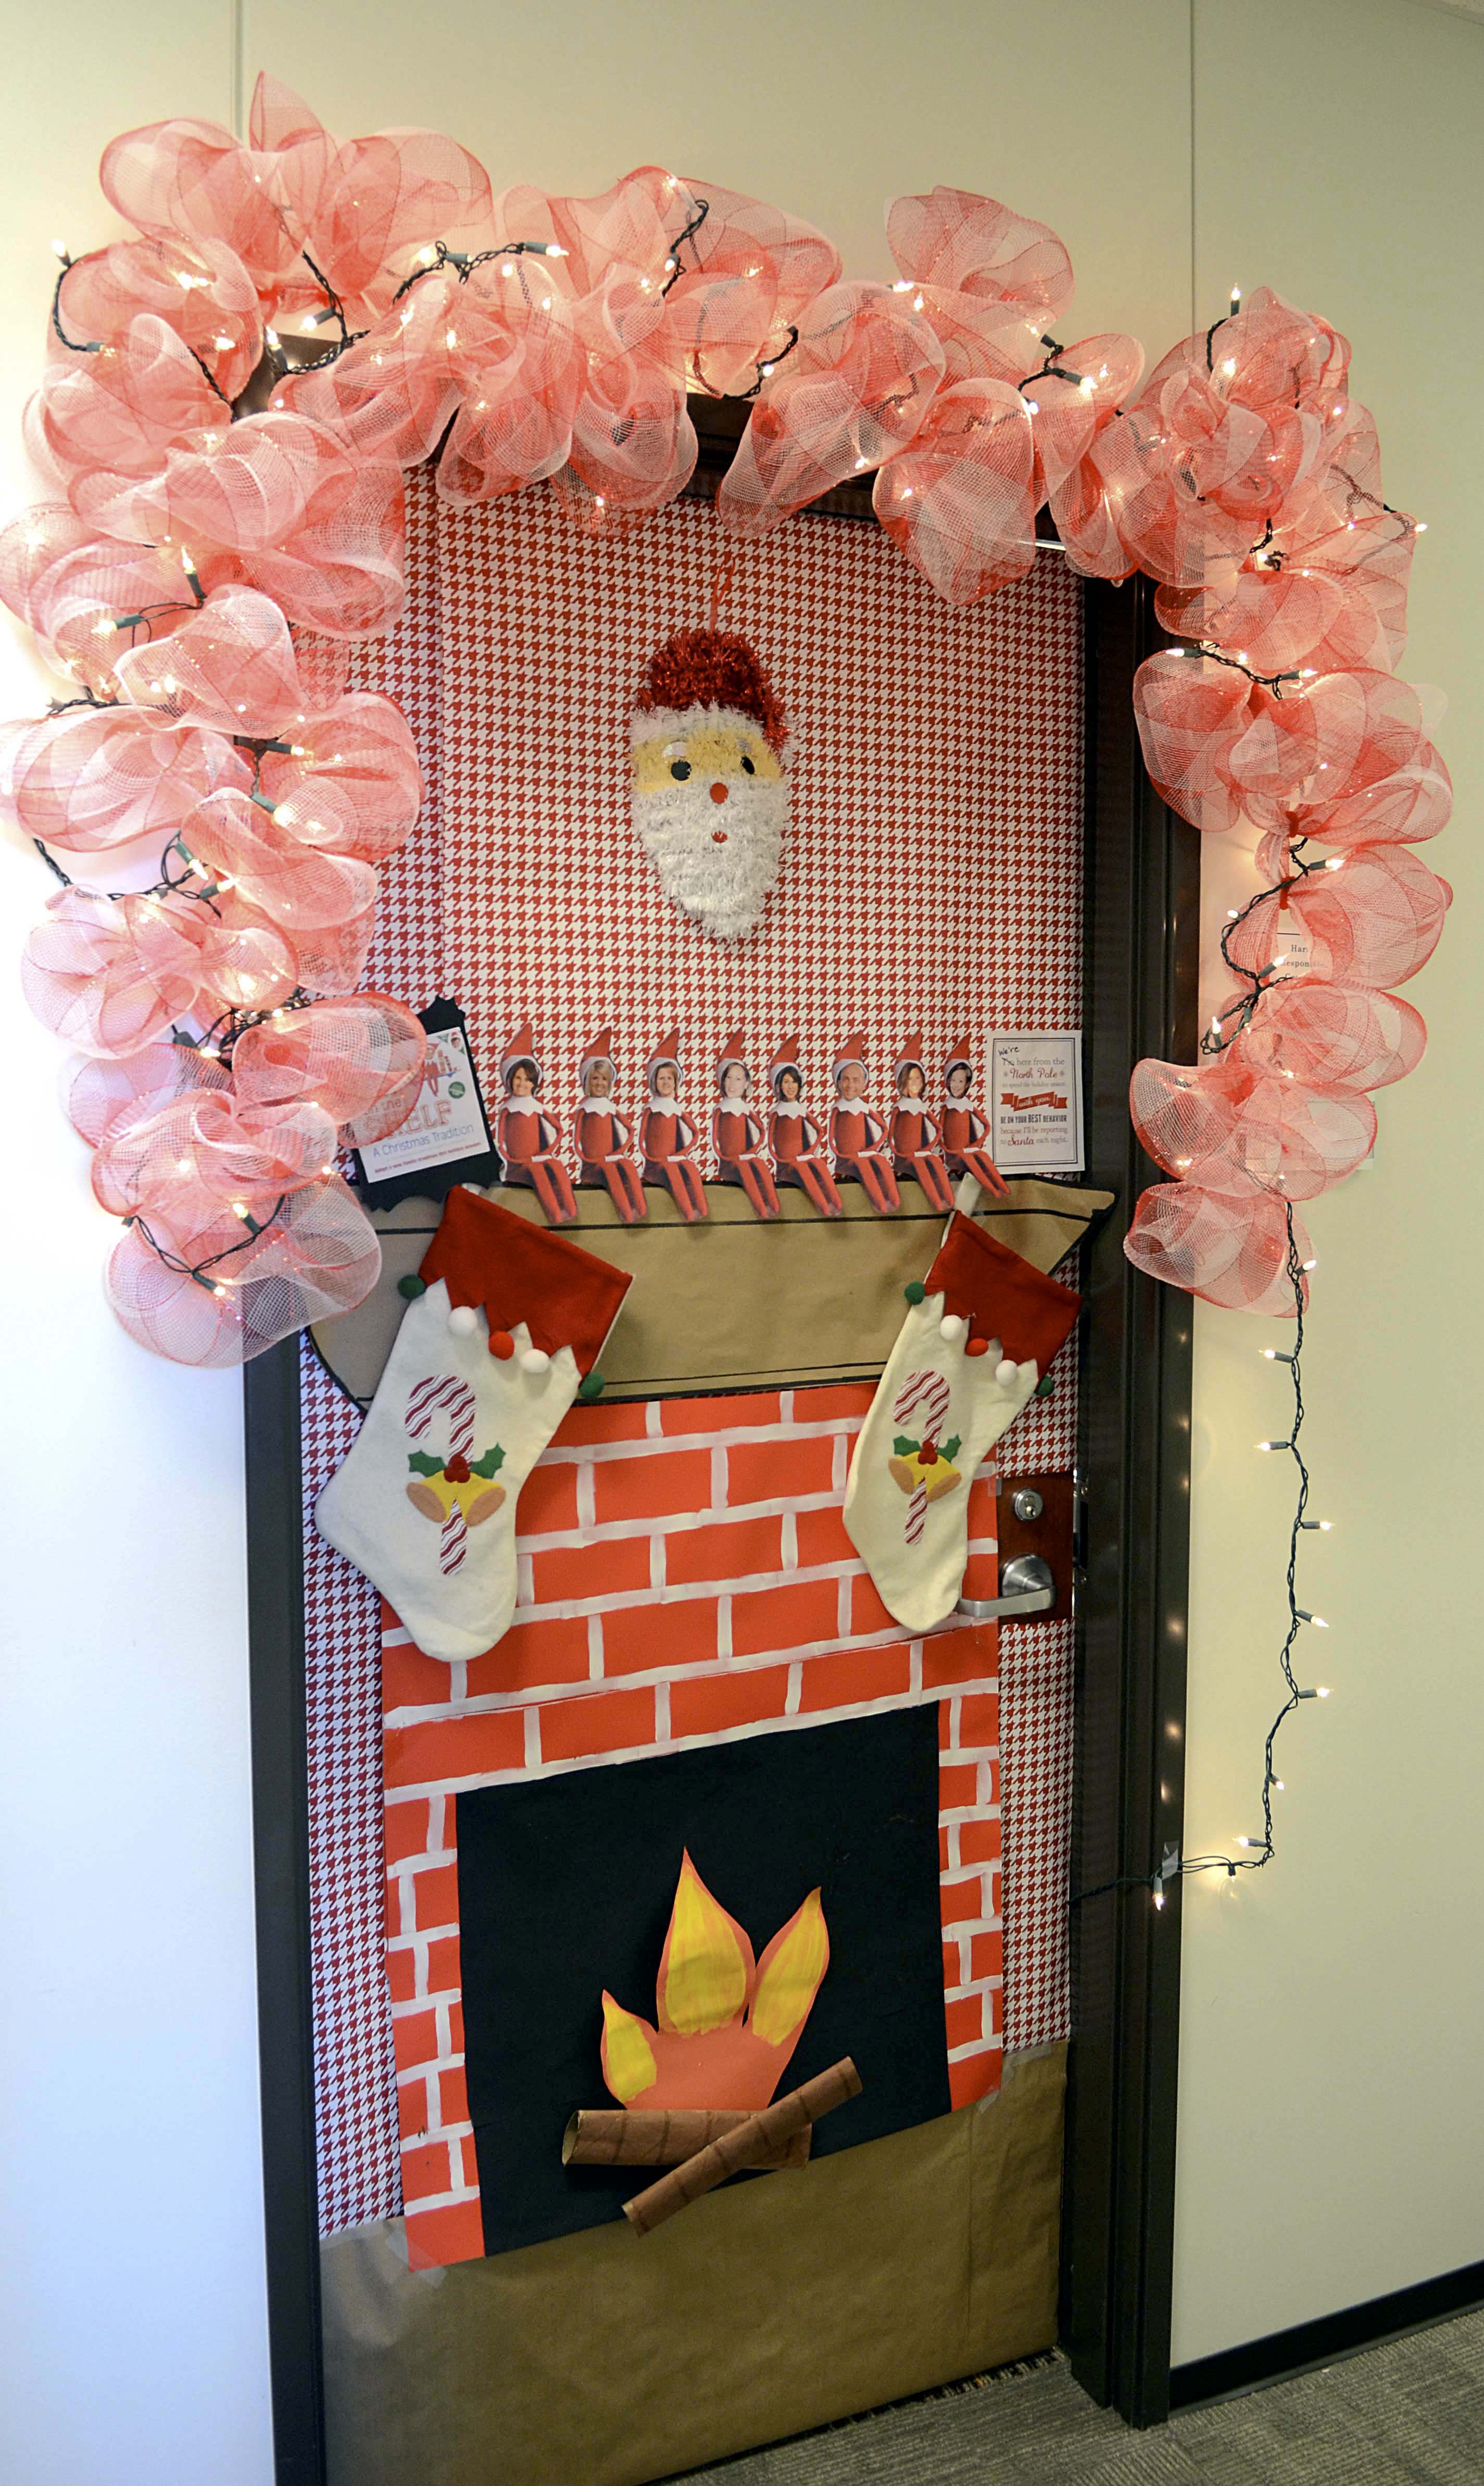 40 Classroom Christmas Decorations Ideas For 2016  Decoration Love